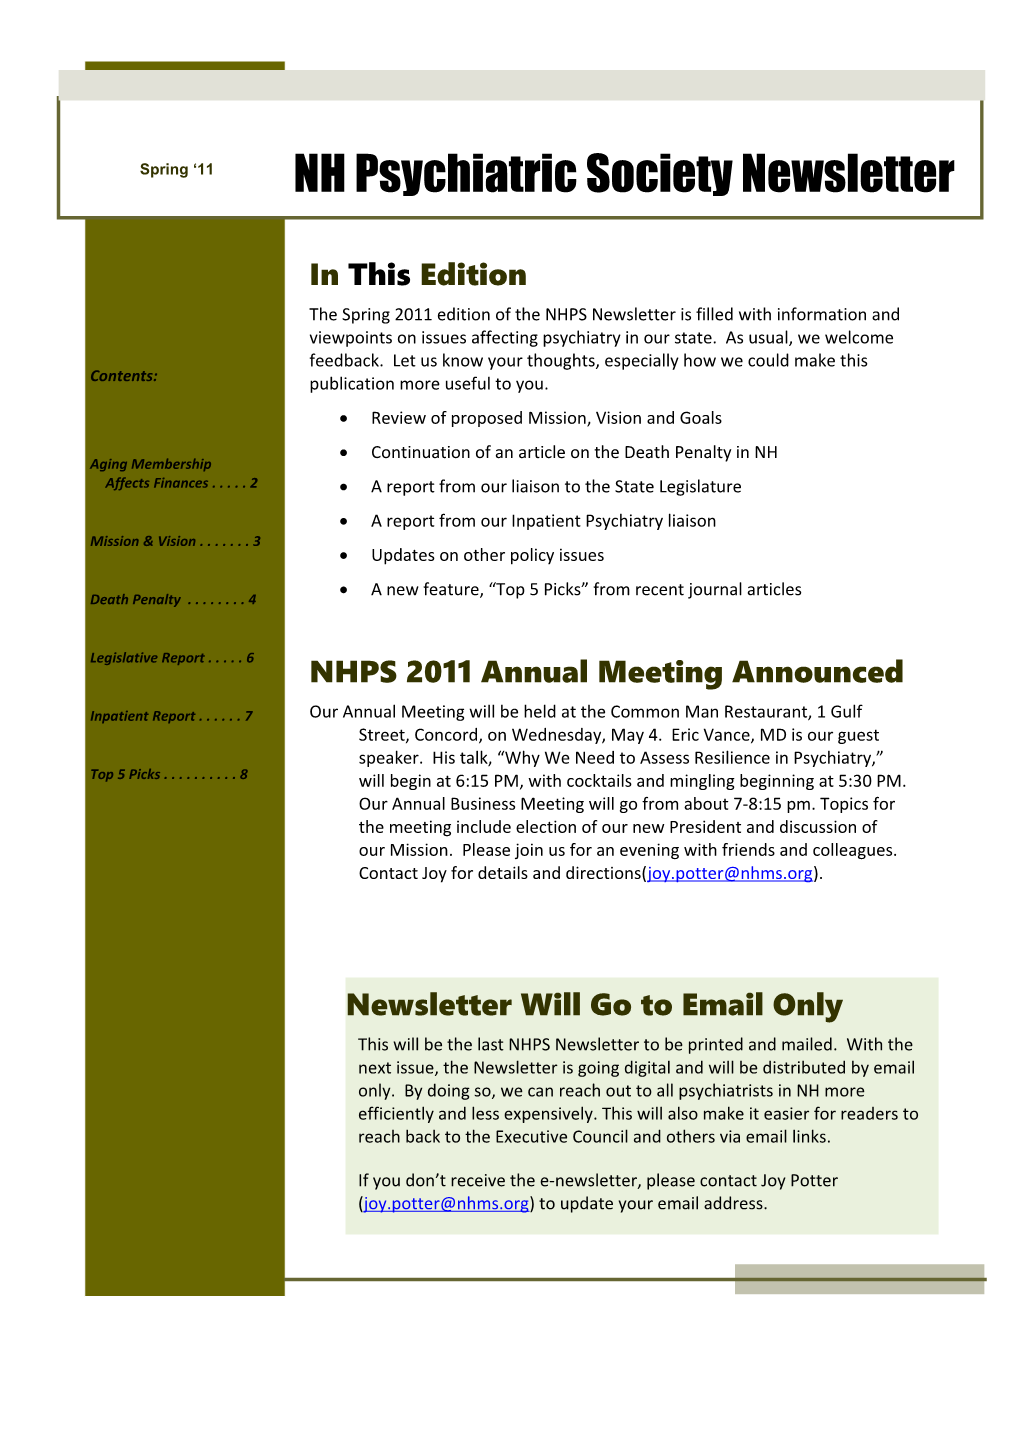 Defining the NHPS Mission